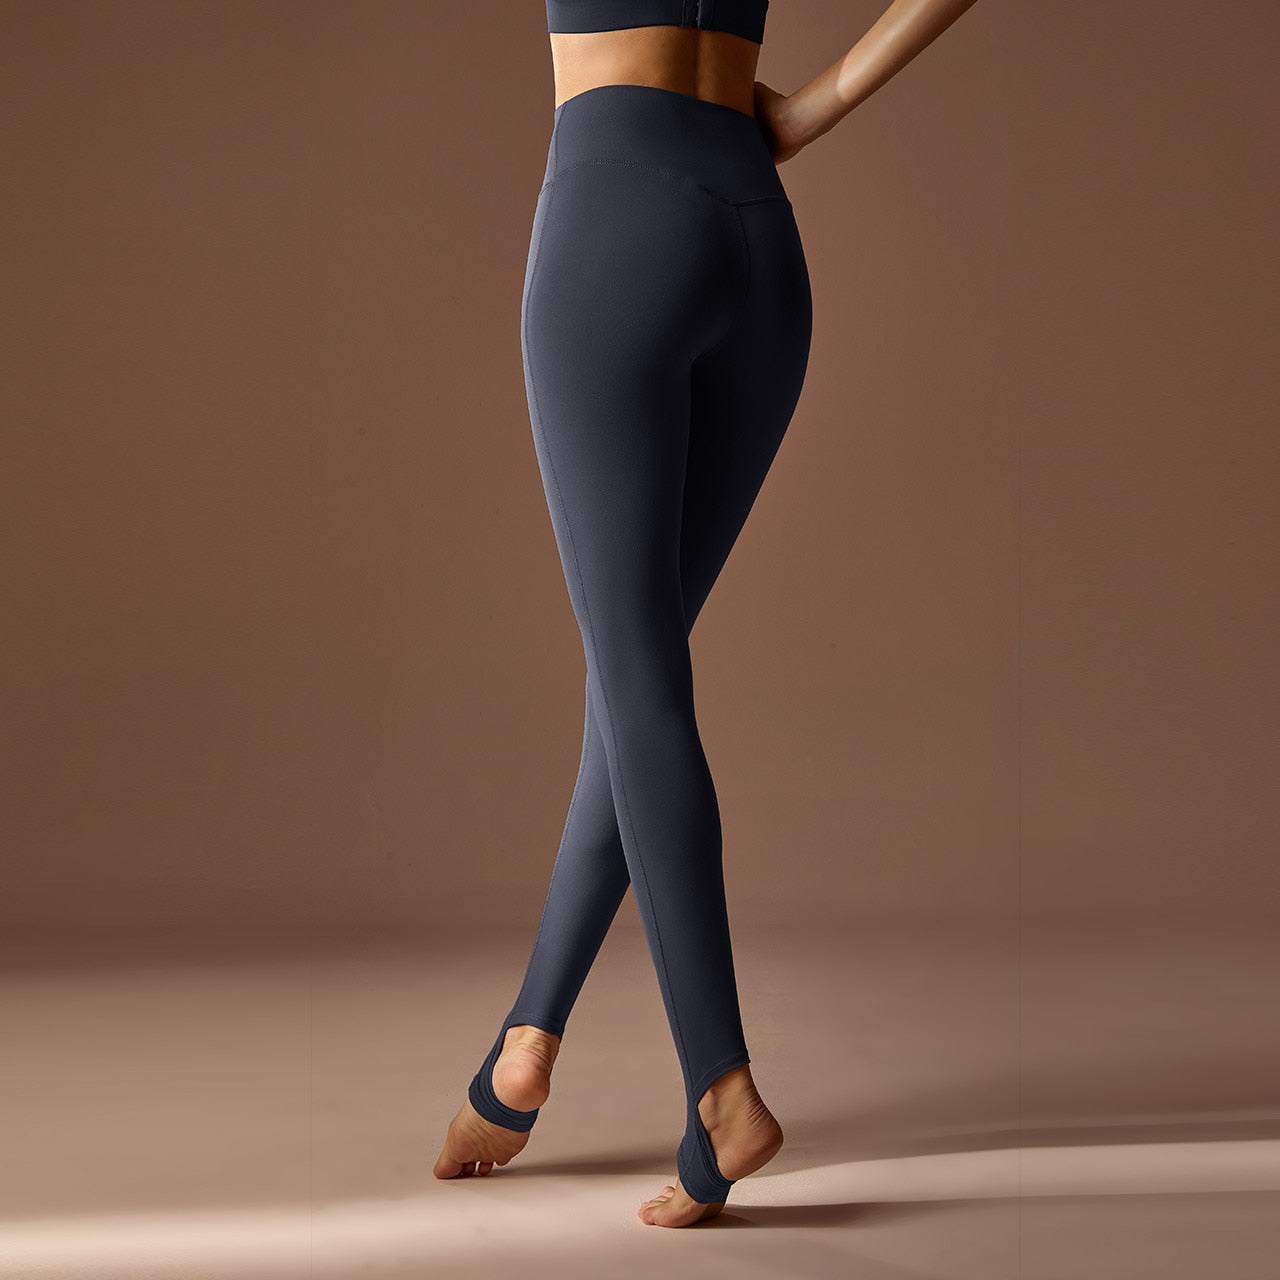 What is New Cool Sexy Butt Lifting Activewear Stirrup Leggings